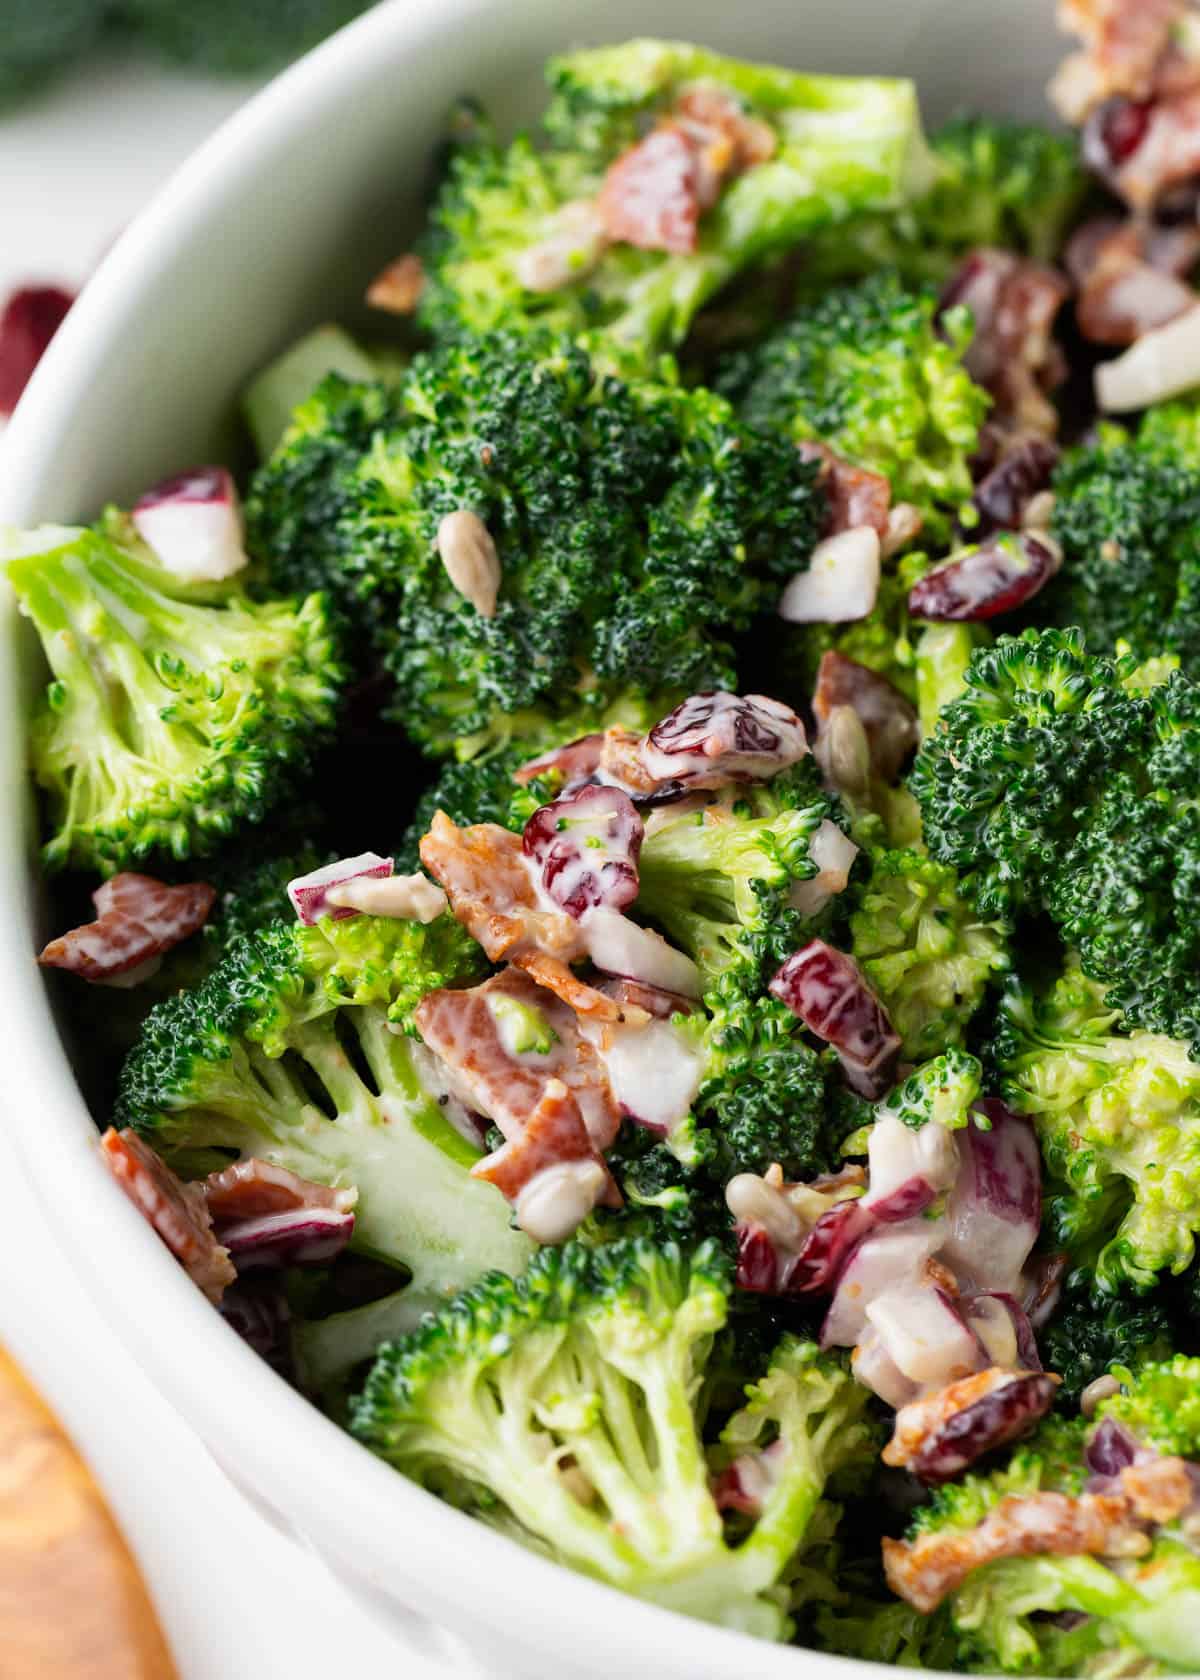 Broccoli salad with bacon in a white bowl.